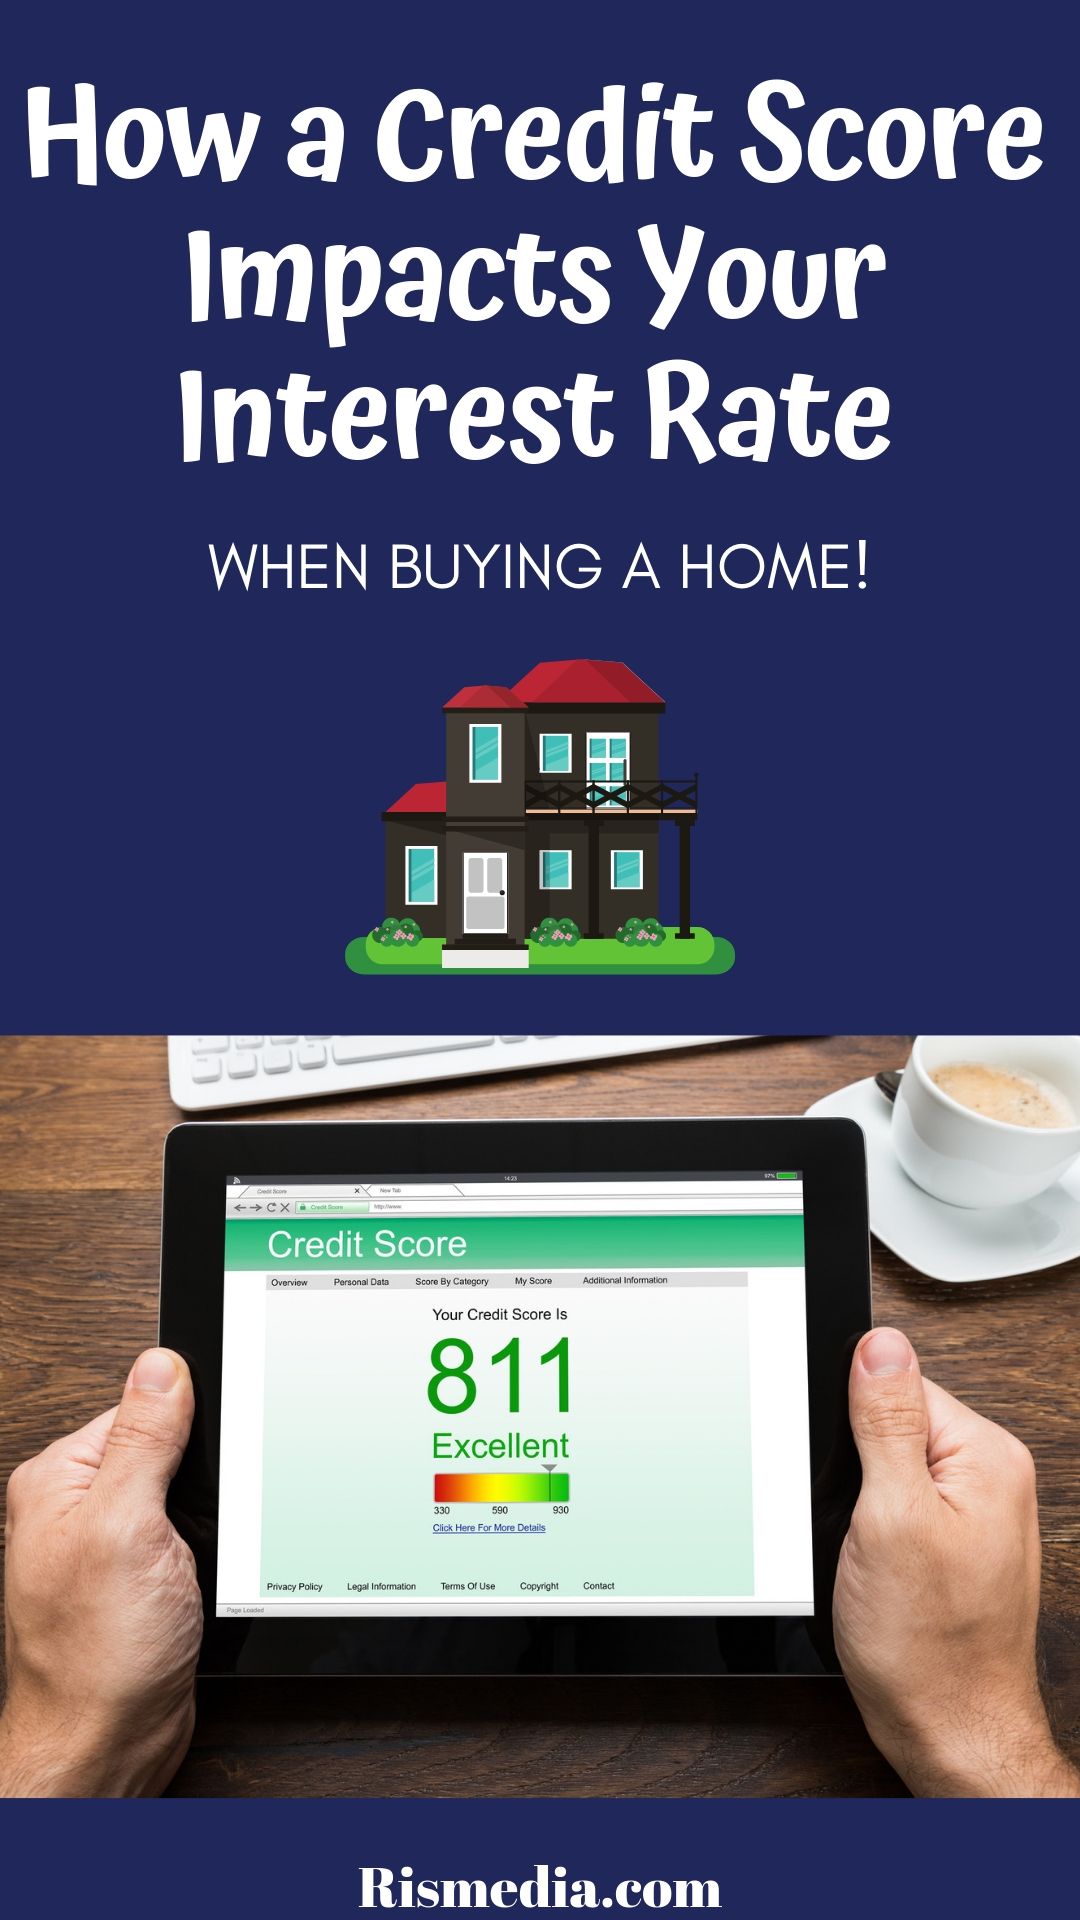 How Credit Scores Impact Your Interest Rate